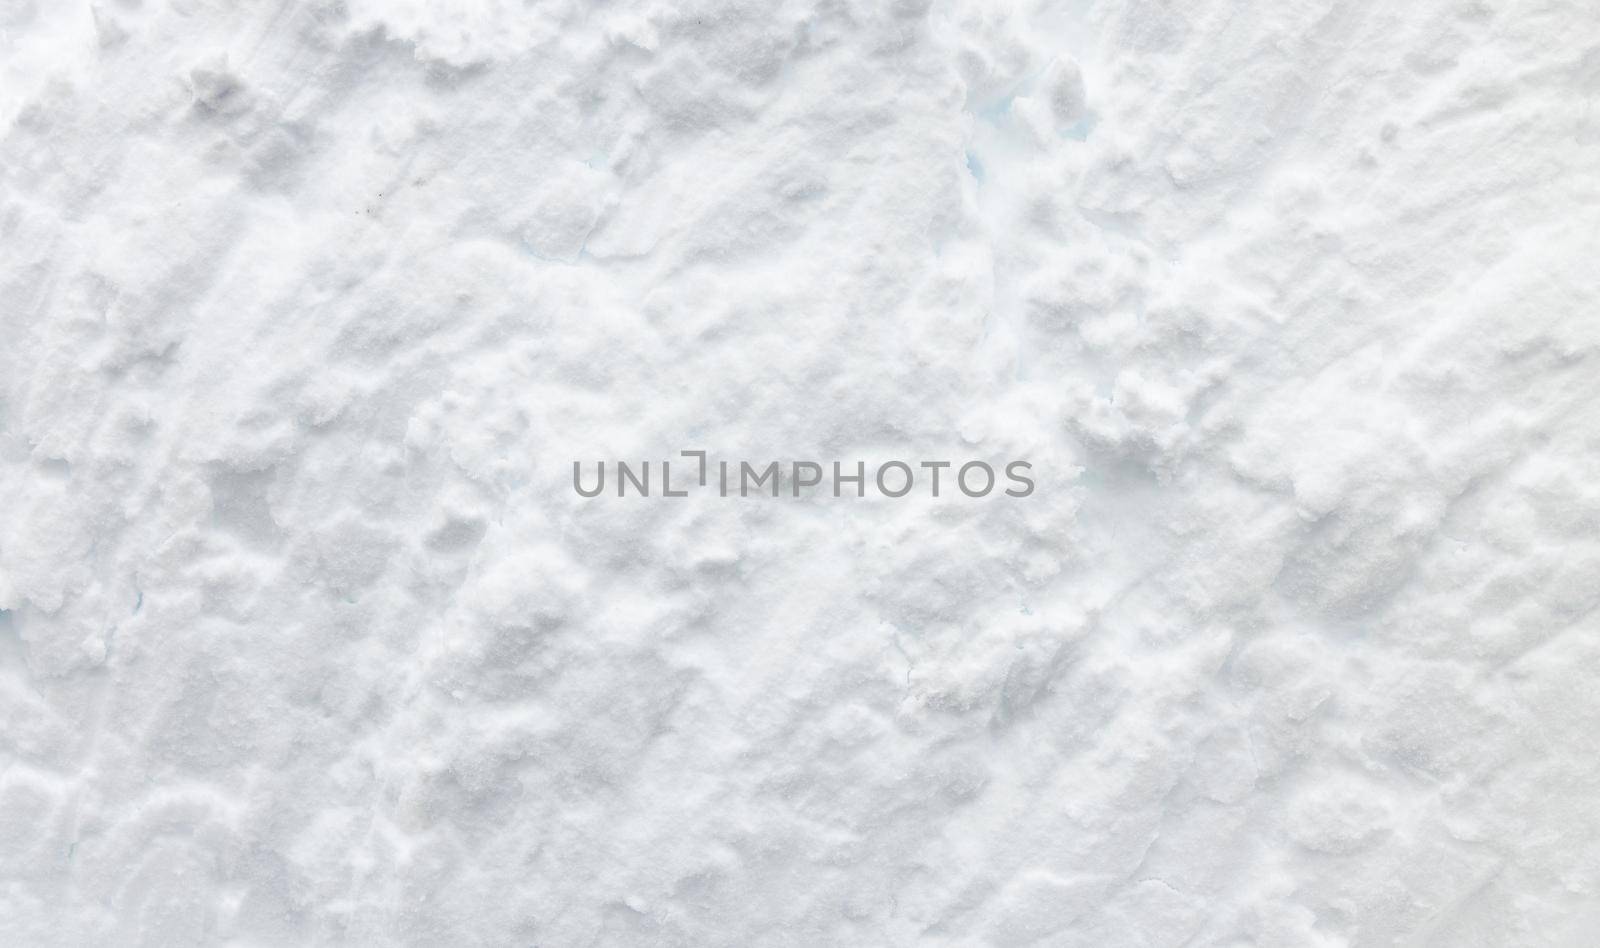 Wall of snow. Snowdrift surface, Winter background. The texture of snow removed with a bucket. Removed compressed snow by EvgeniyQW